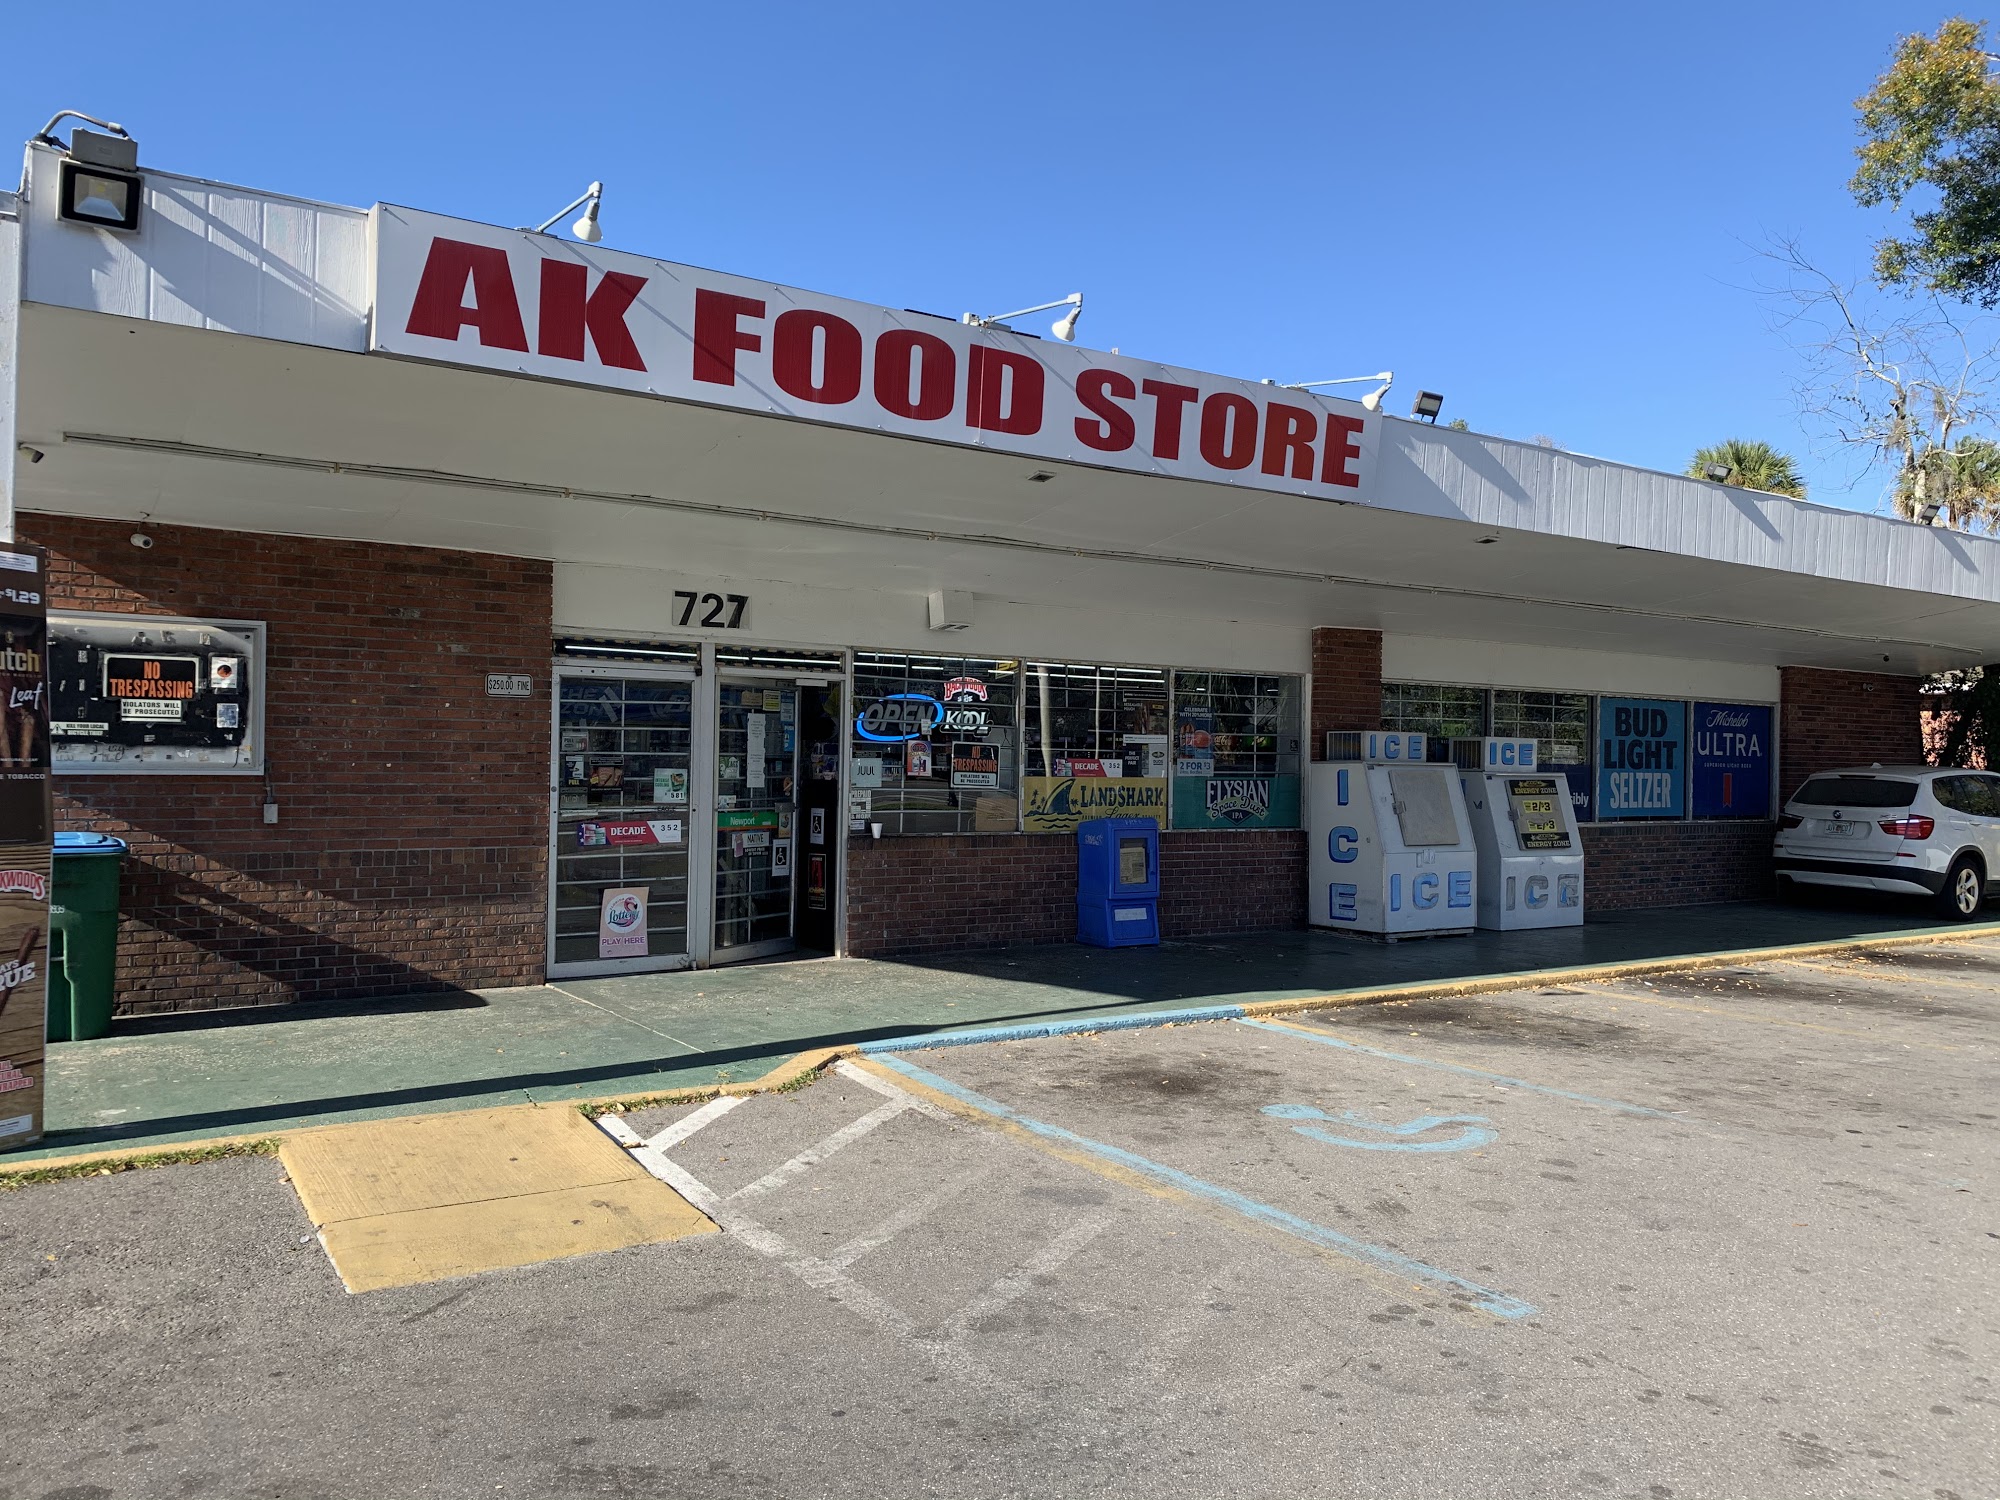 A K Food Store